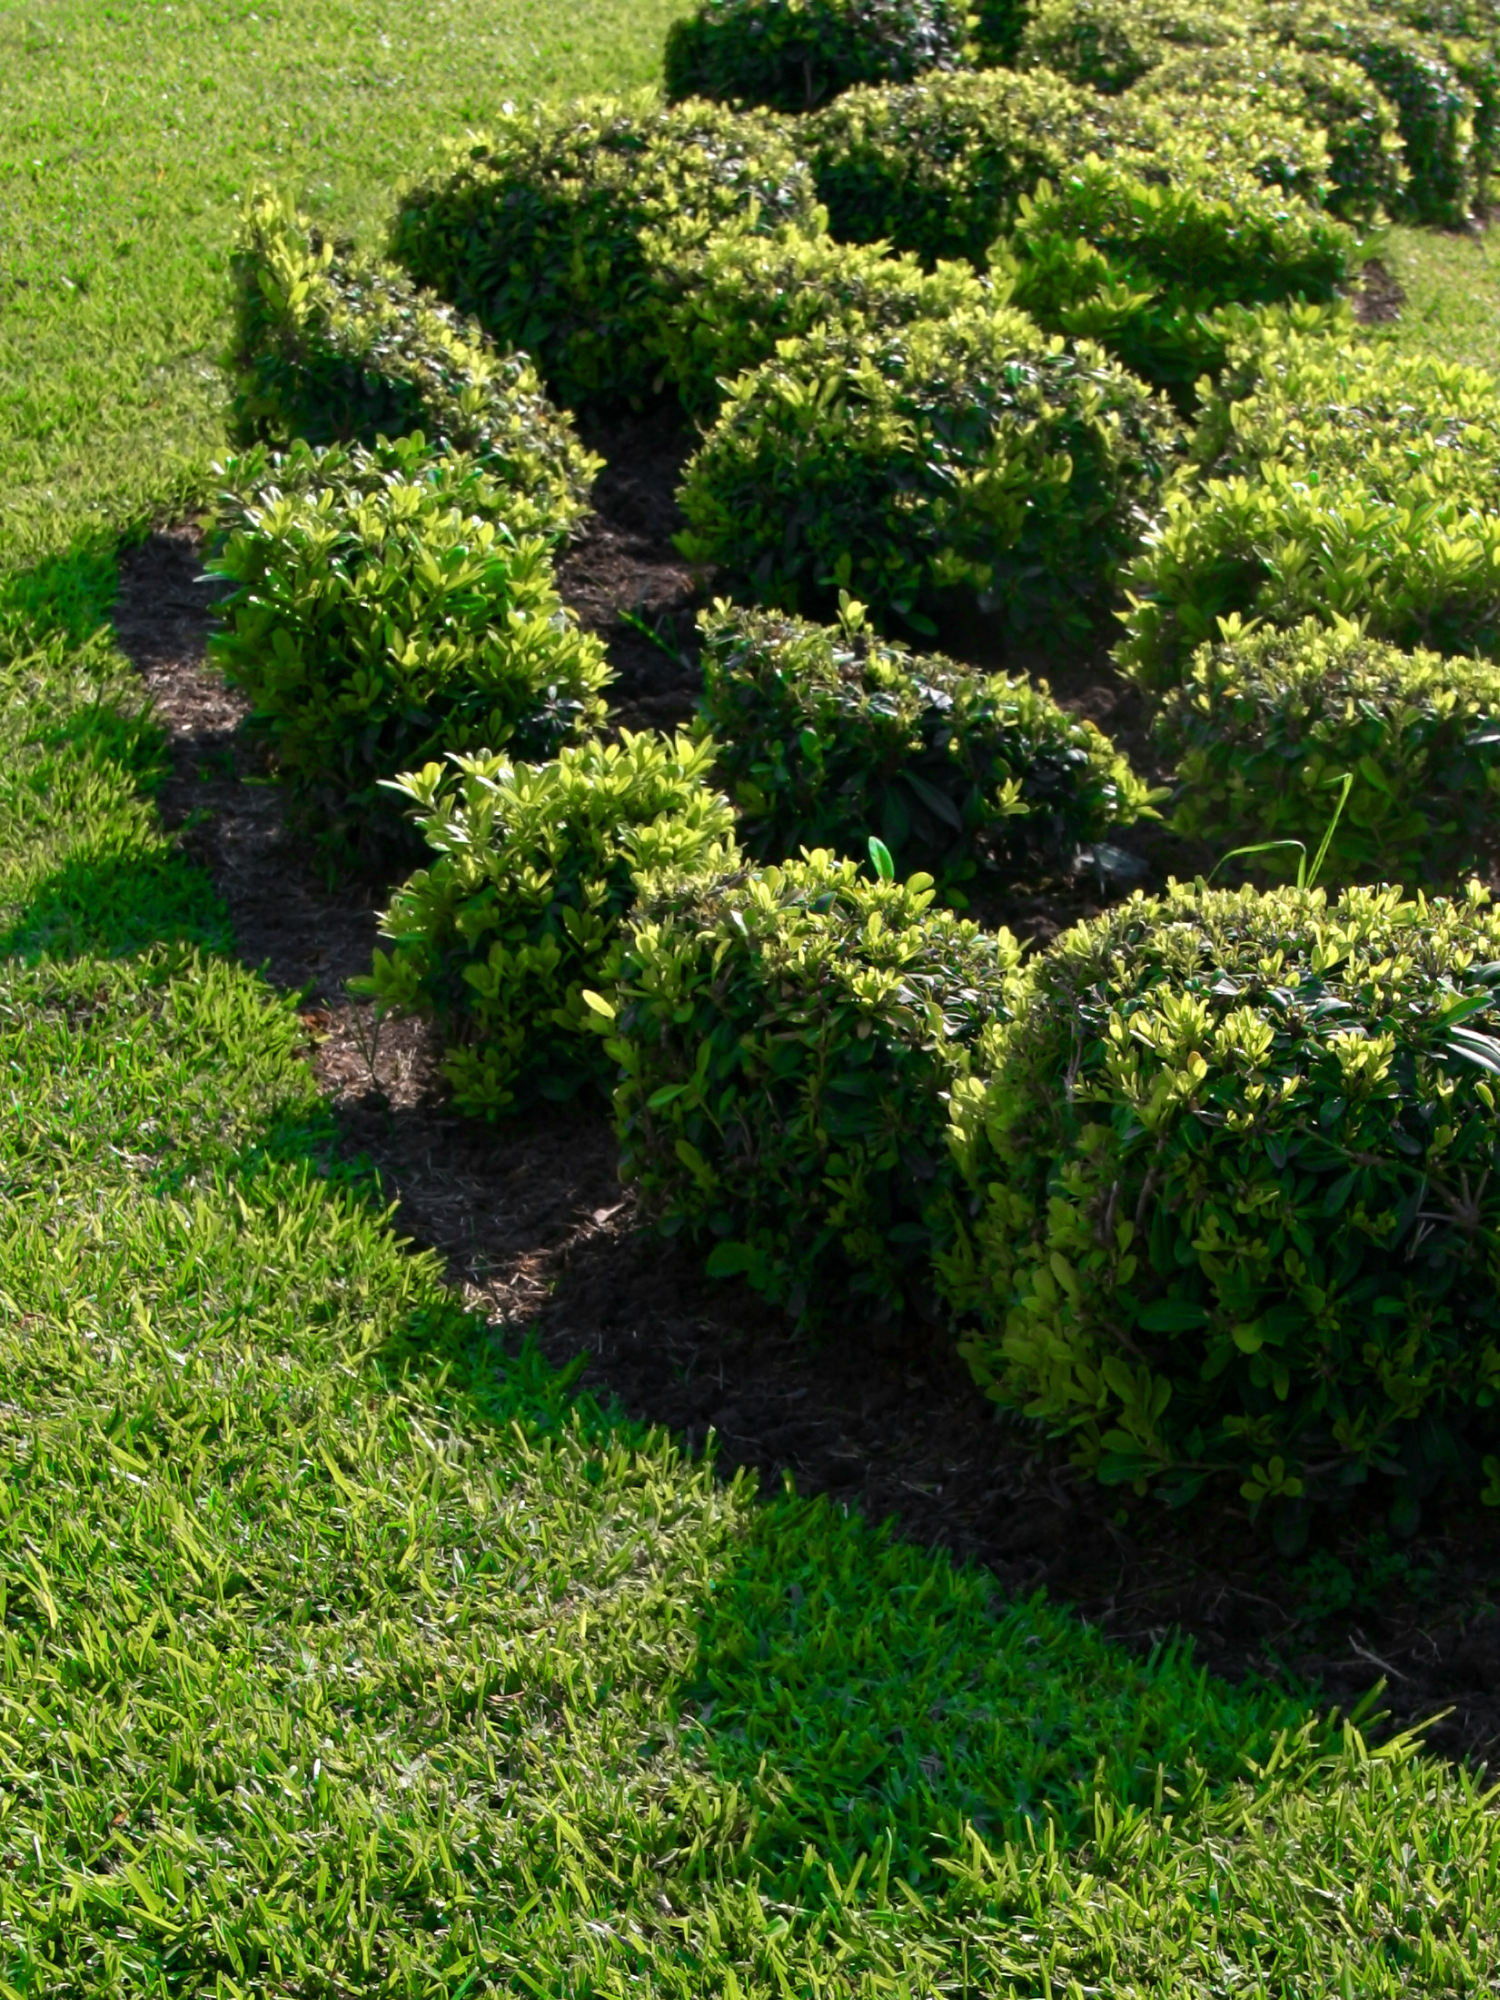 A Planted Row of Bushes